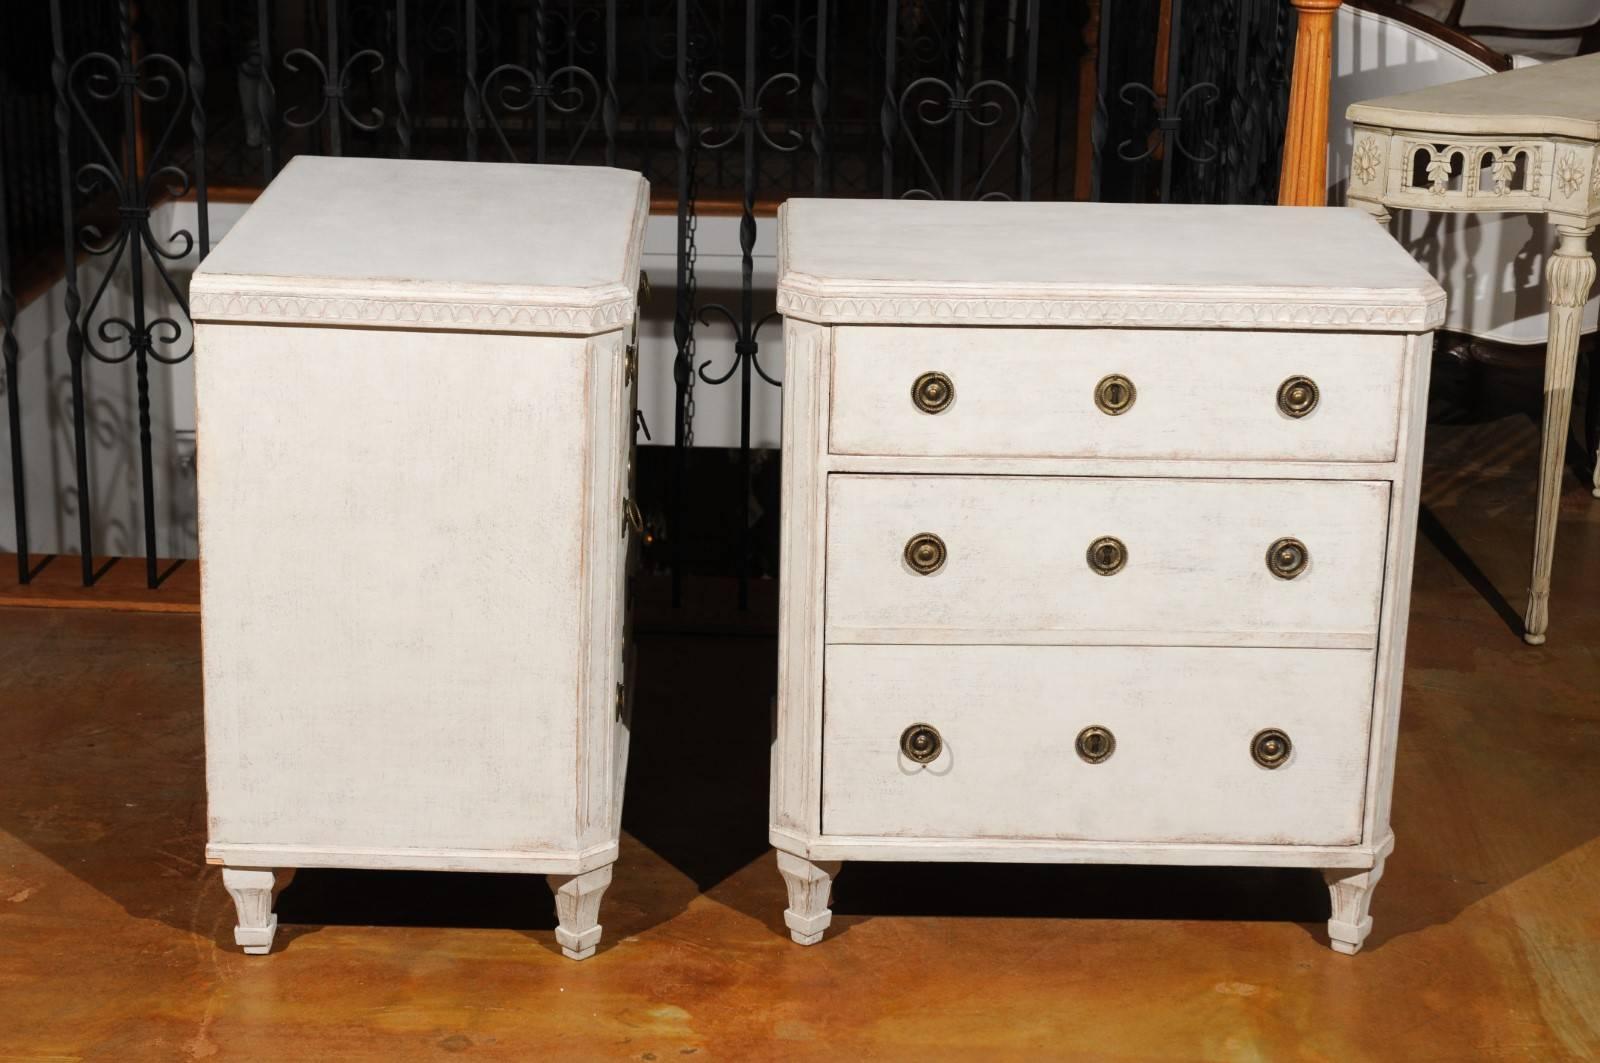 20th Century Pair of Swedish Gustavian Style Painted Chests with Drawers and Door, circa 1900